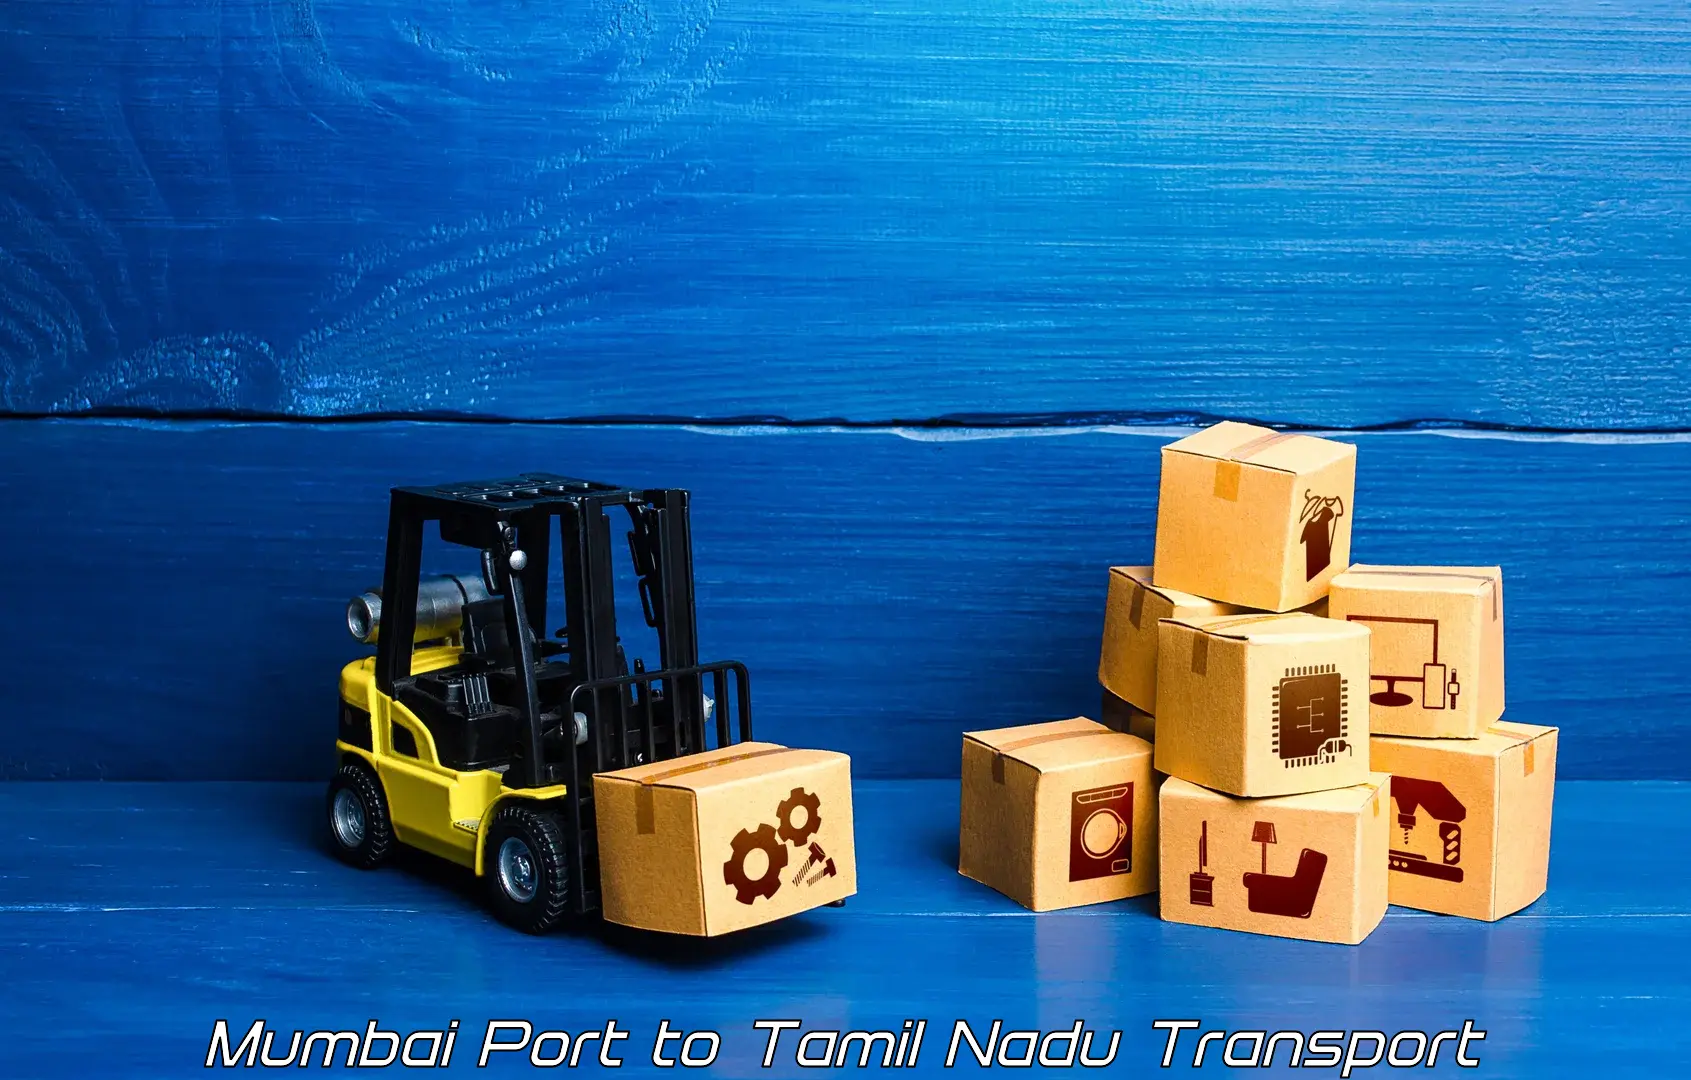 Pick up transport service in Mumbai Port to Sri Ramachandra Institute of Higher Education and Research Chennai